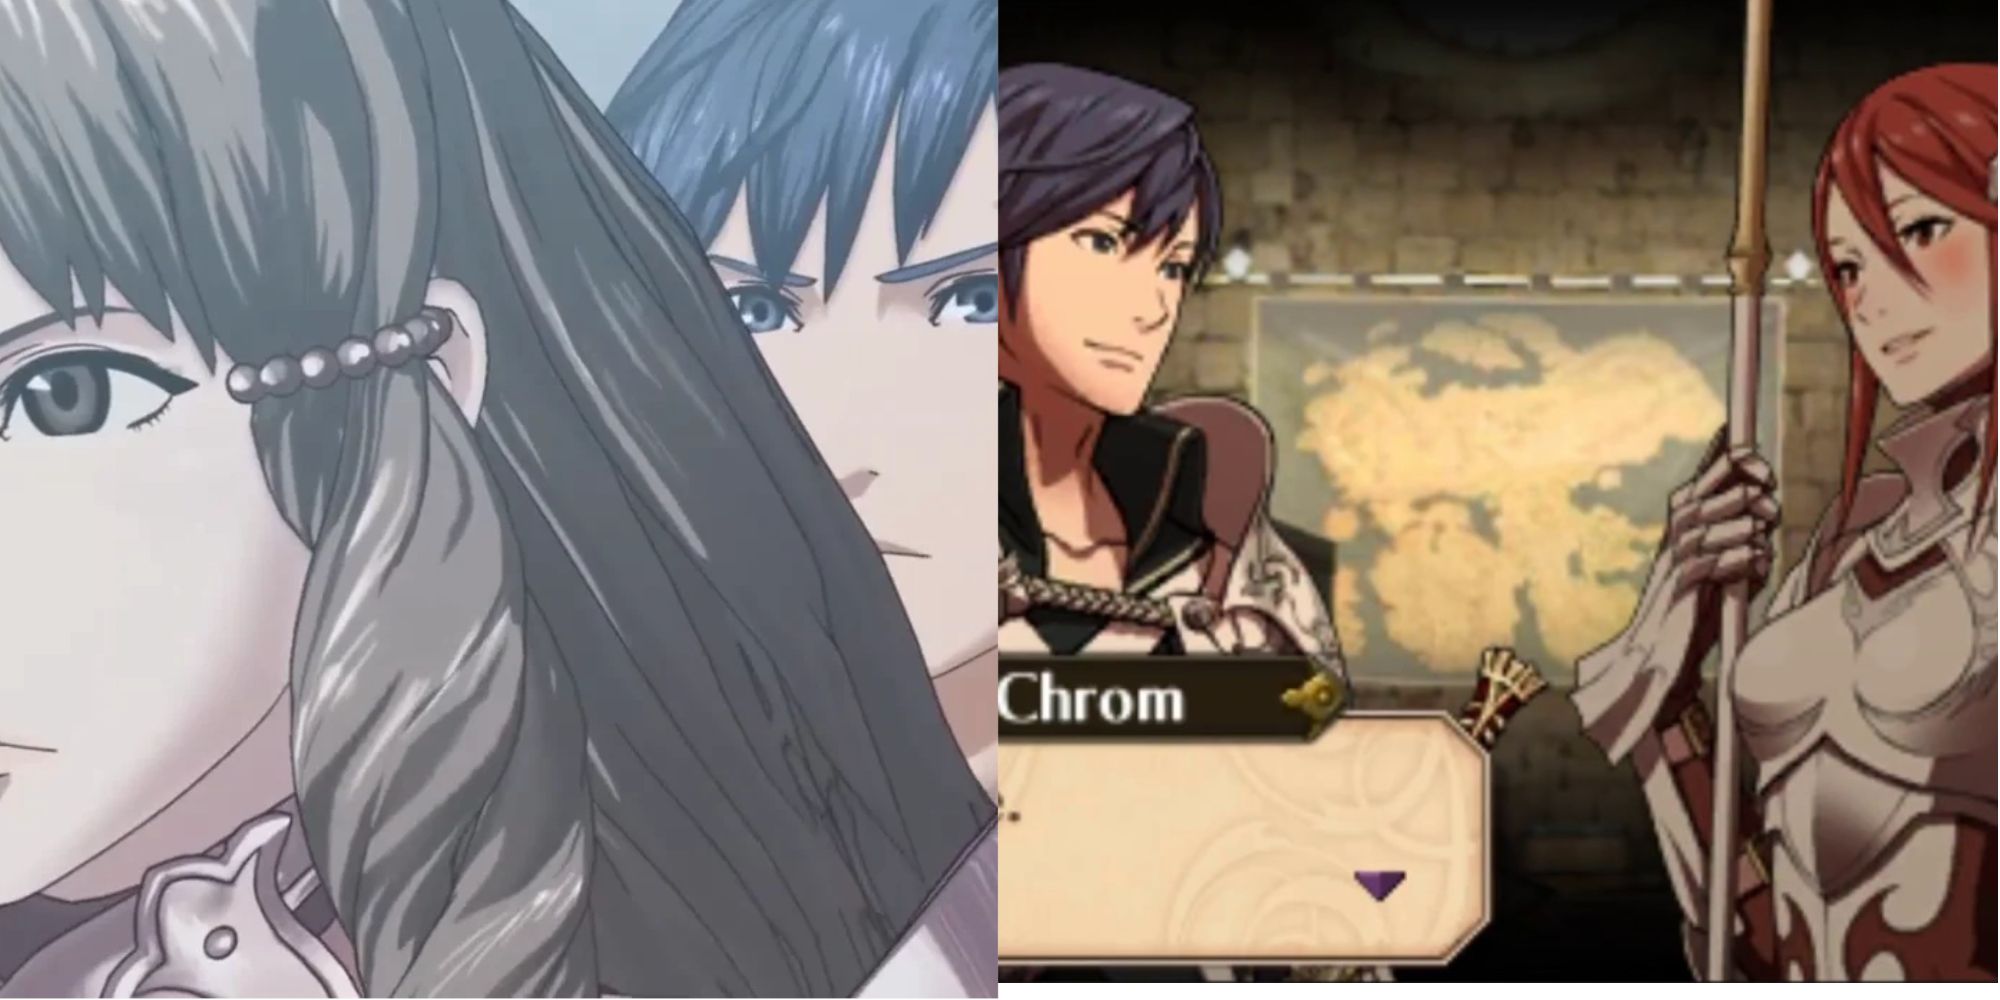 Chrom, Sumia, and Cordelia from Fire Emblem